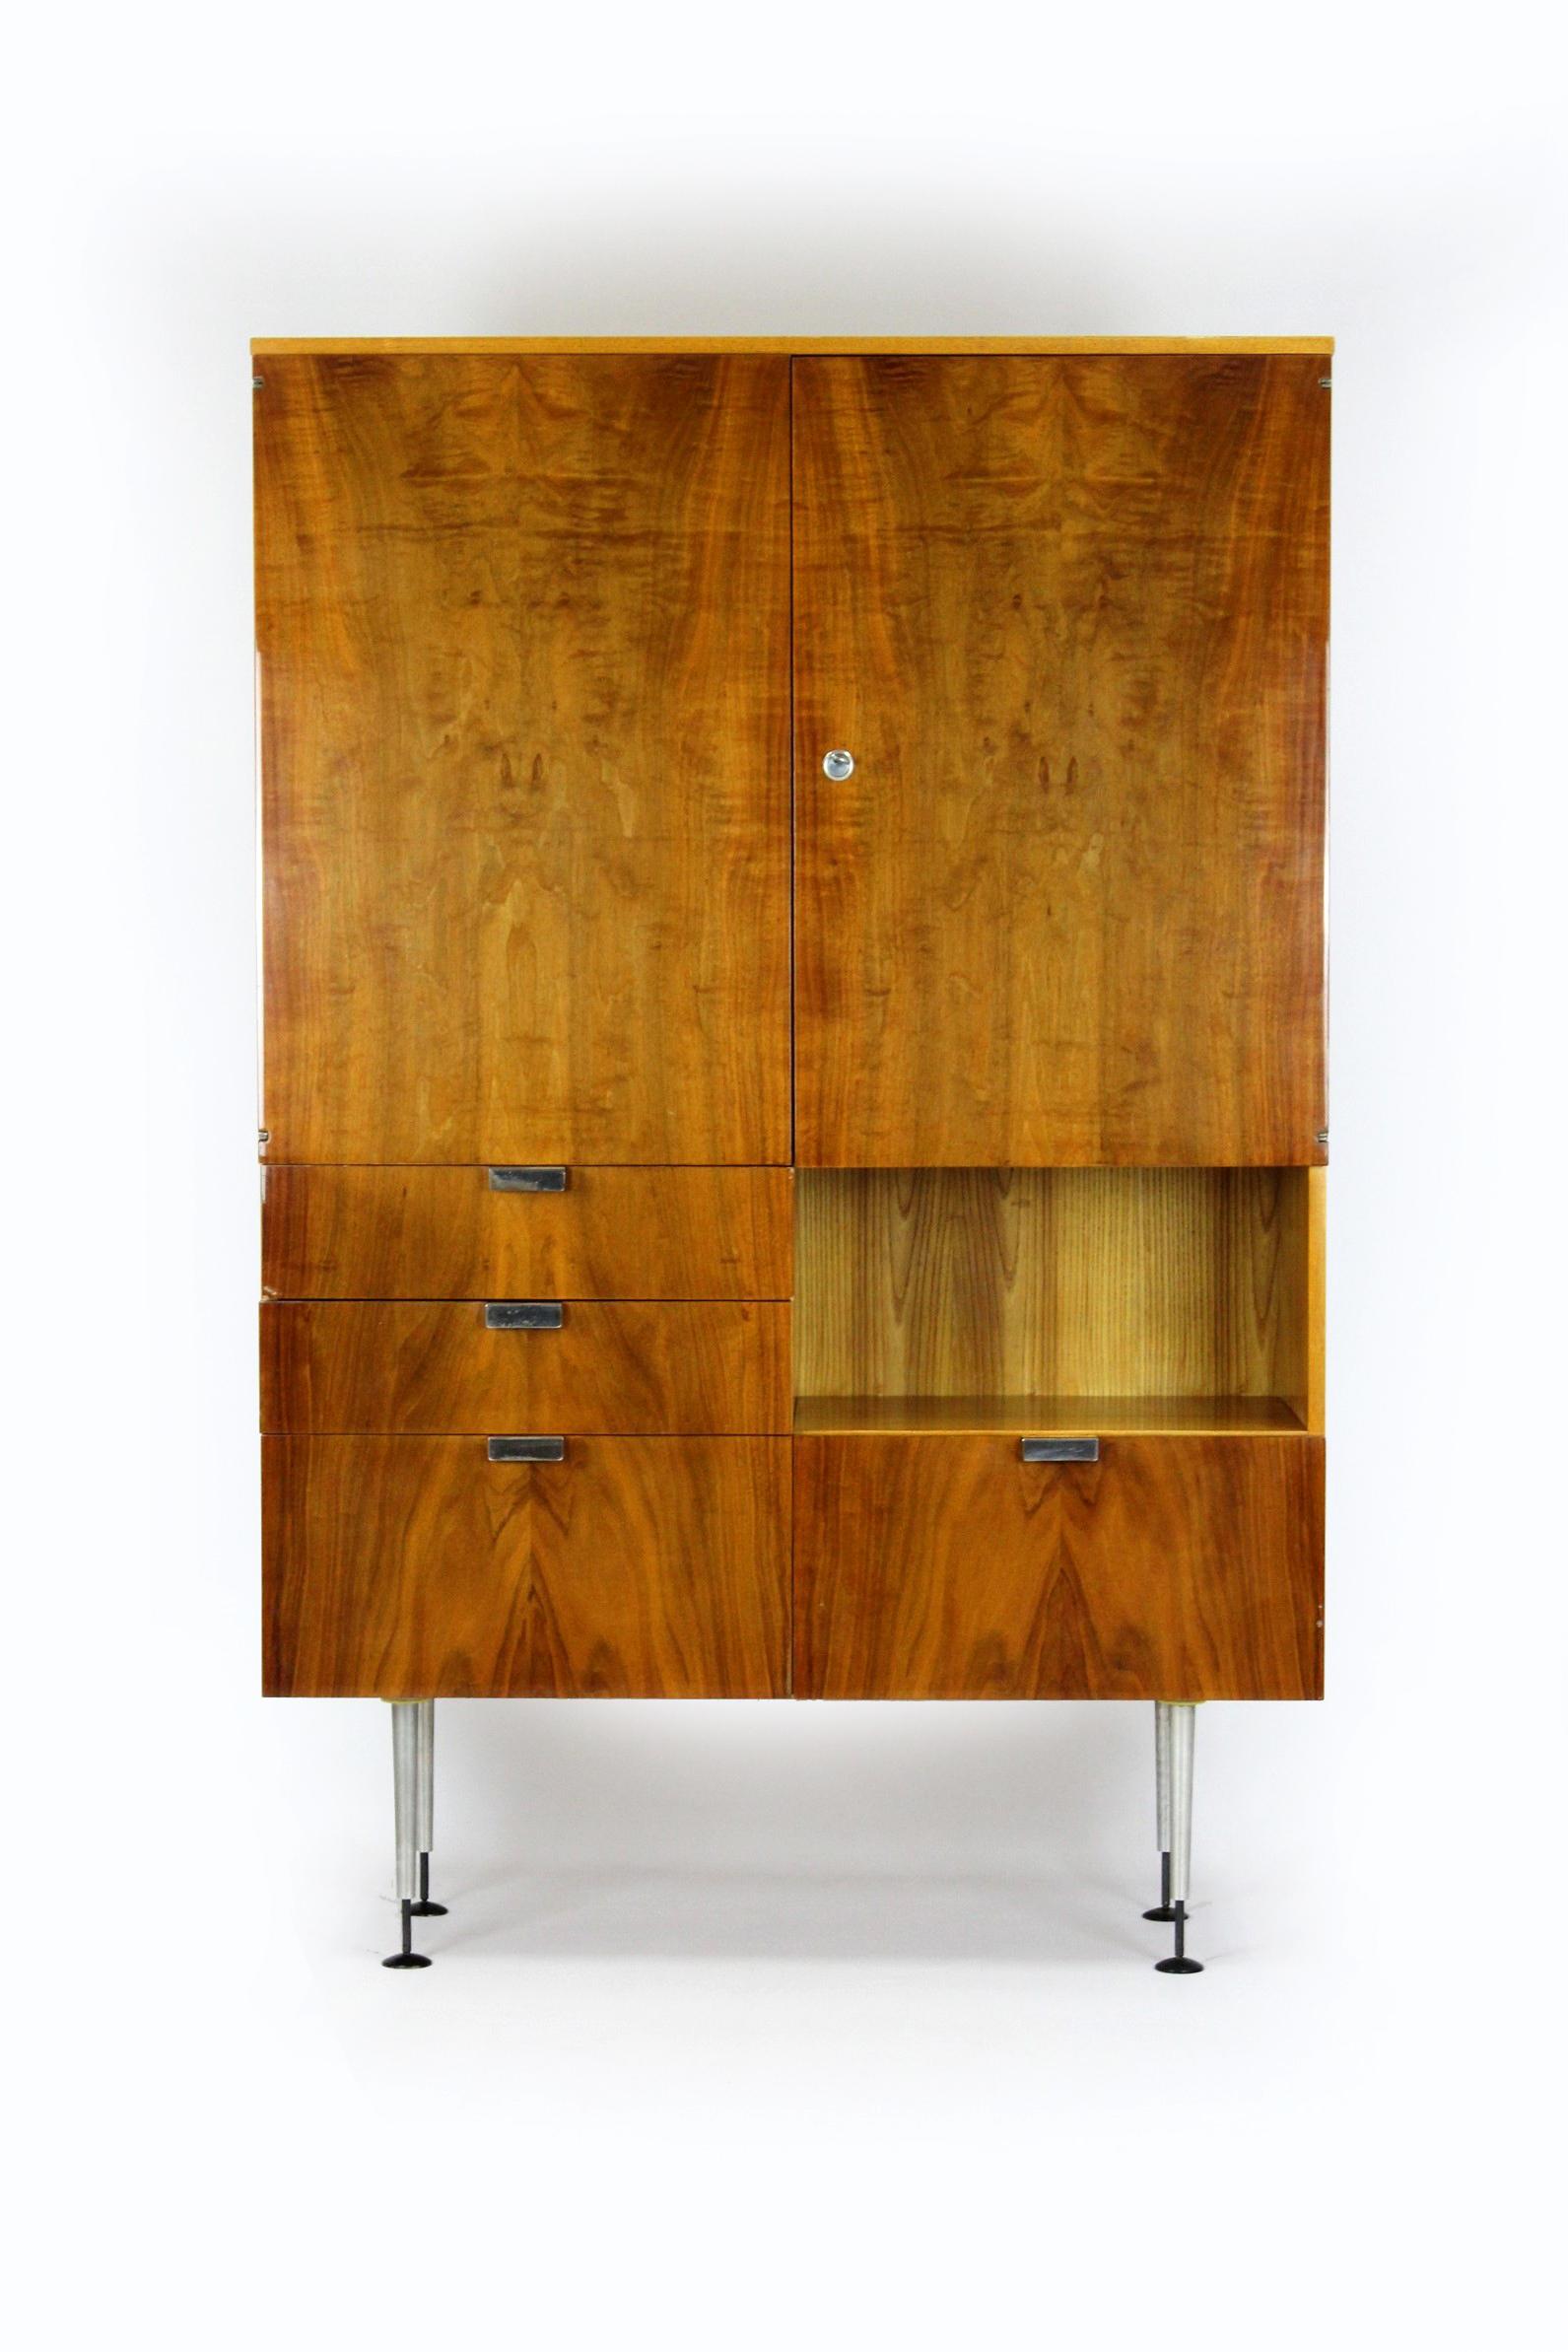 This Mid-Century Modern wardrobe from the 1960s was manufactured by Jiton in the Czech Republic. The wardrobe is made of two types of wood - ash and walnut. The wardrobe has original glass shelves and drawers. Supported on height-adjustable metal